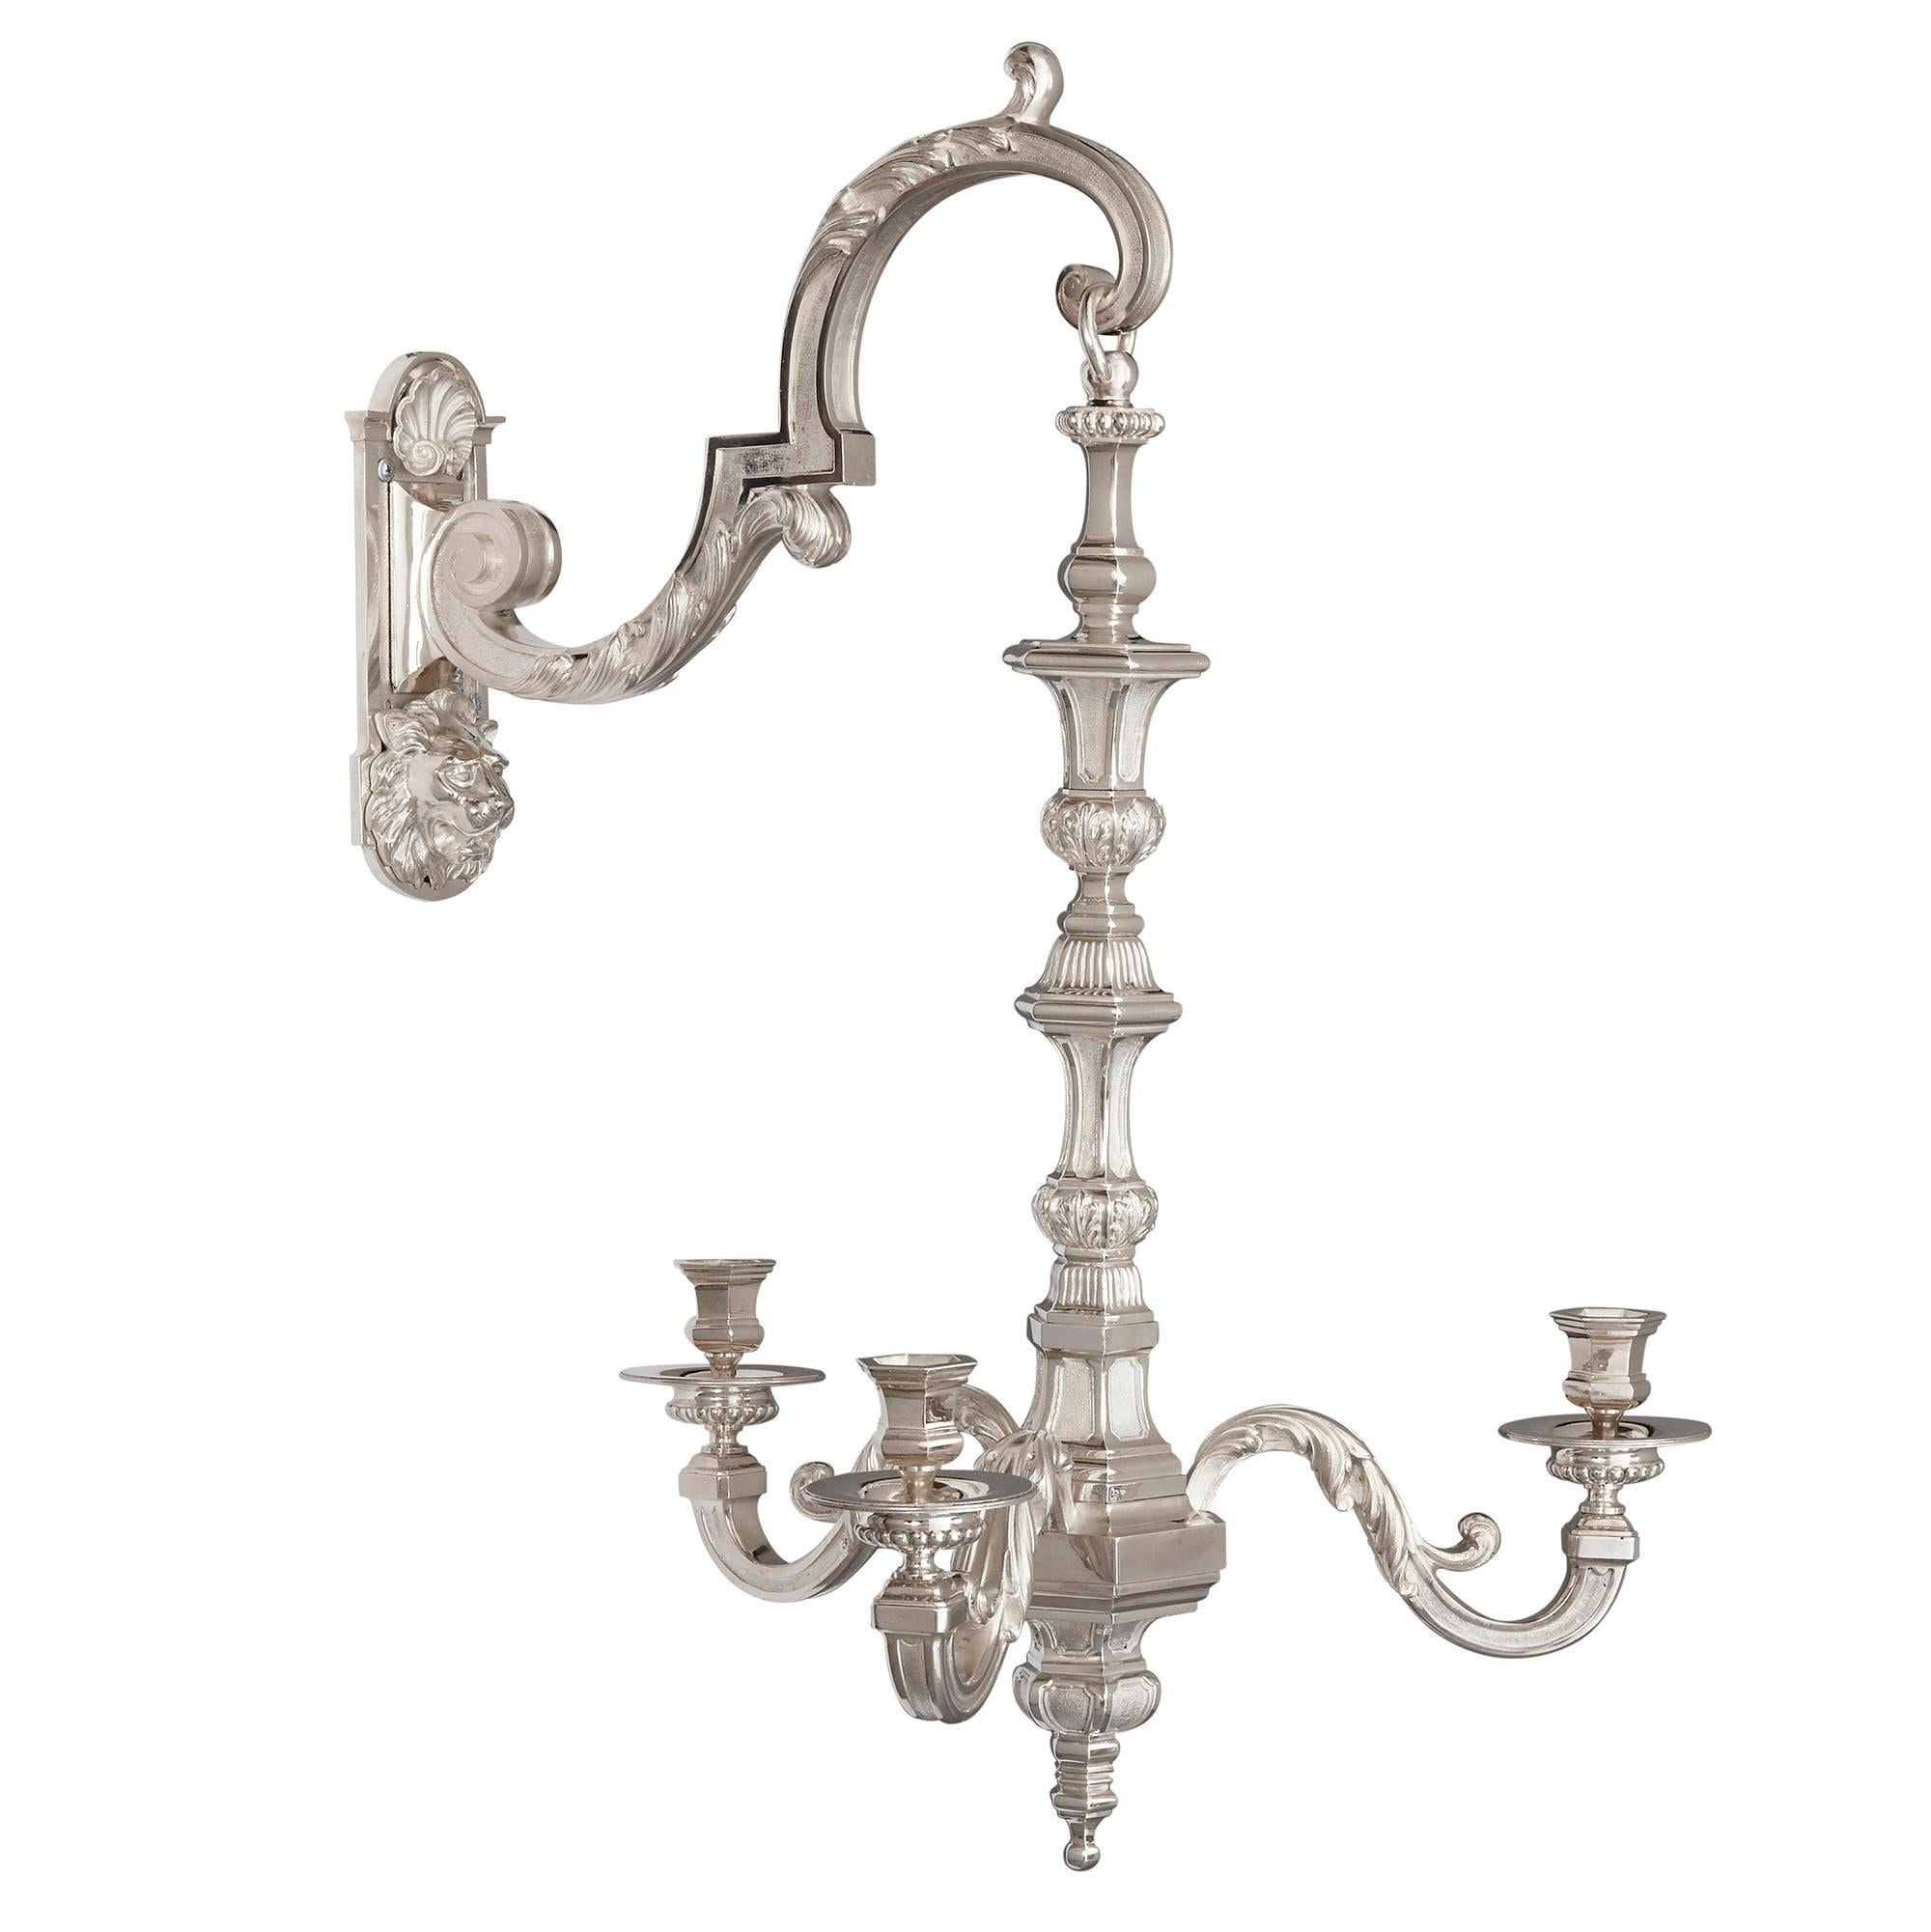 Two 19th century French neoclassical style three-branch wall lights
French, 19th century
Dimensions: Height 80cm, width 47cm, depth 50cm

Designed in the elegant French Neoclassical style, this pair of three-branch wall lights are crafted from